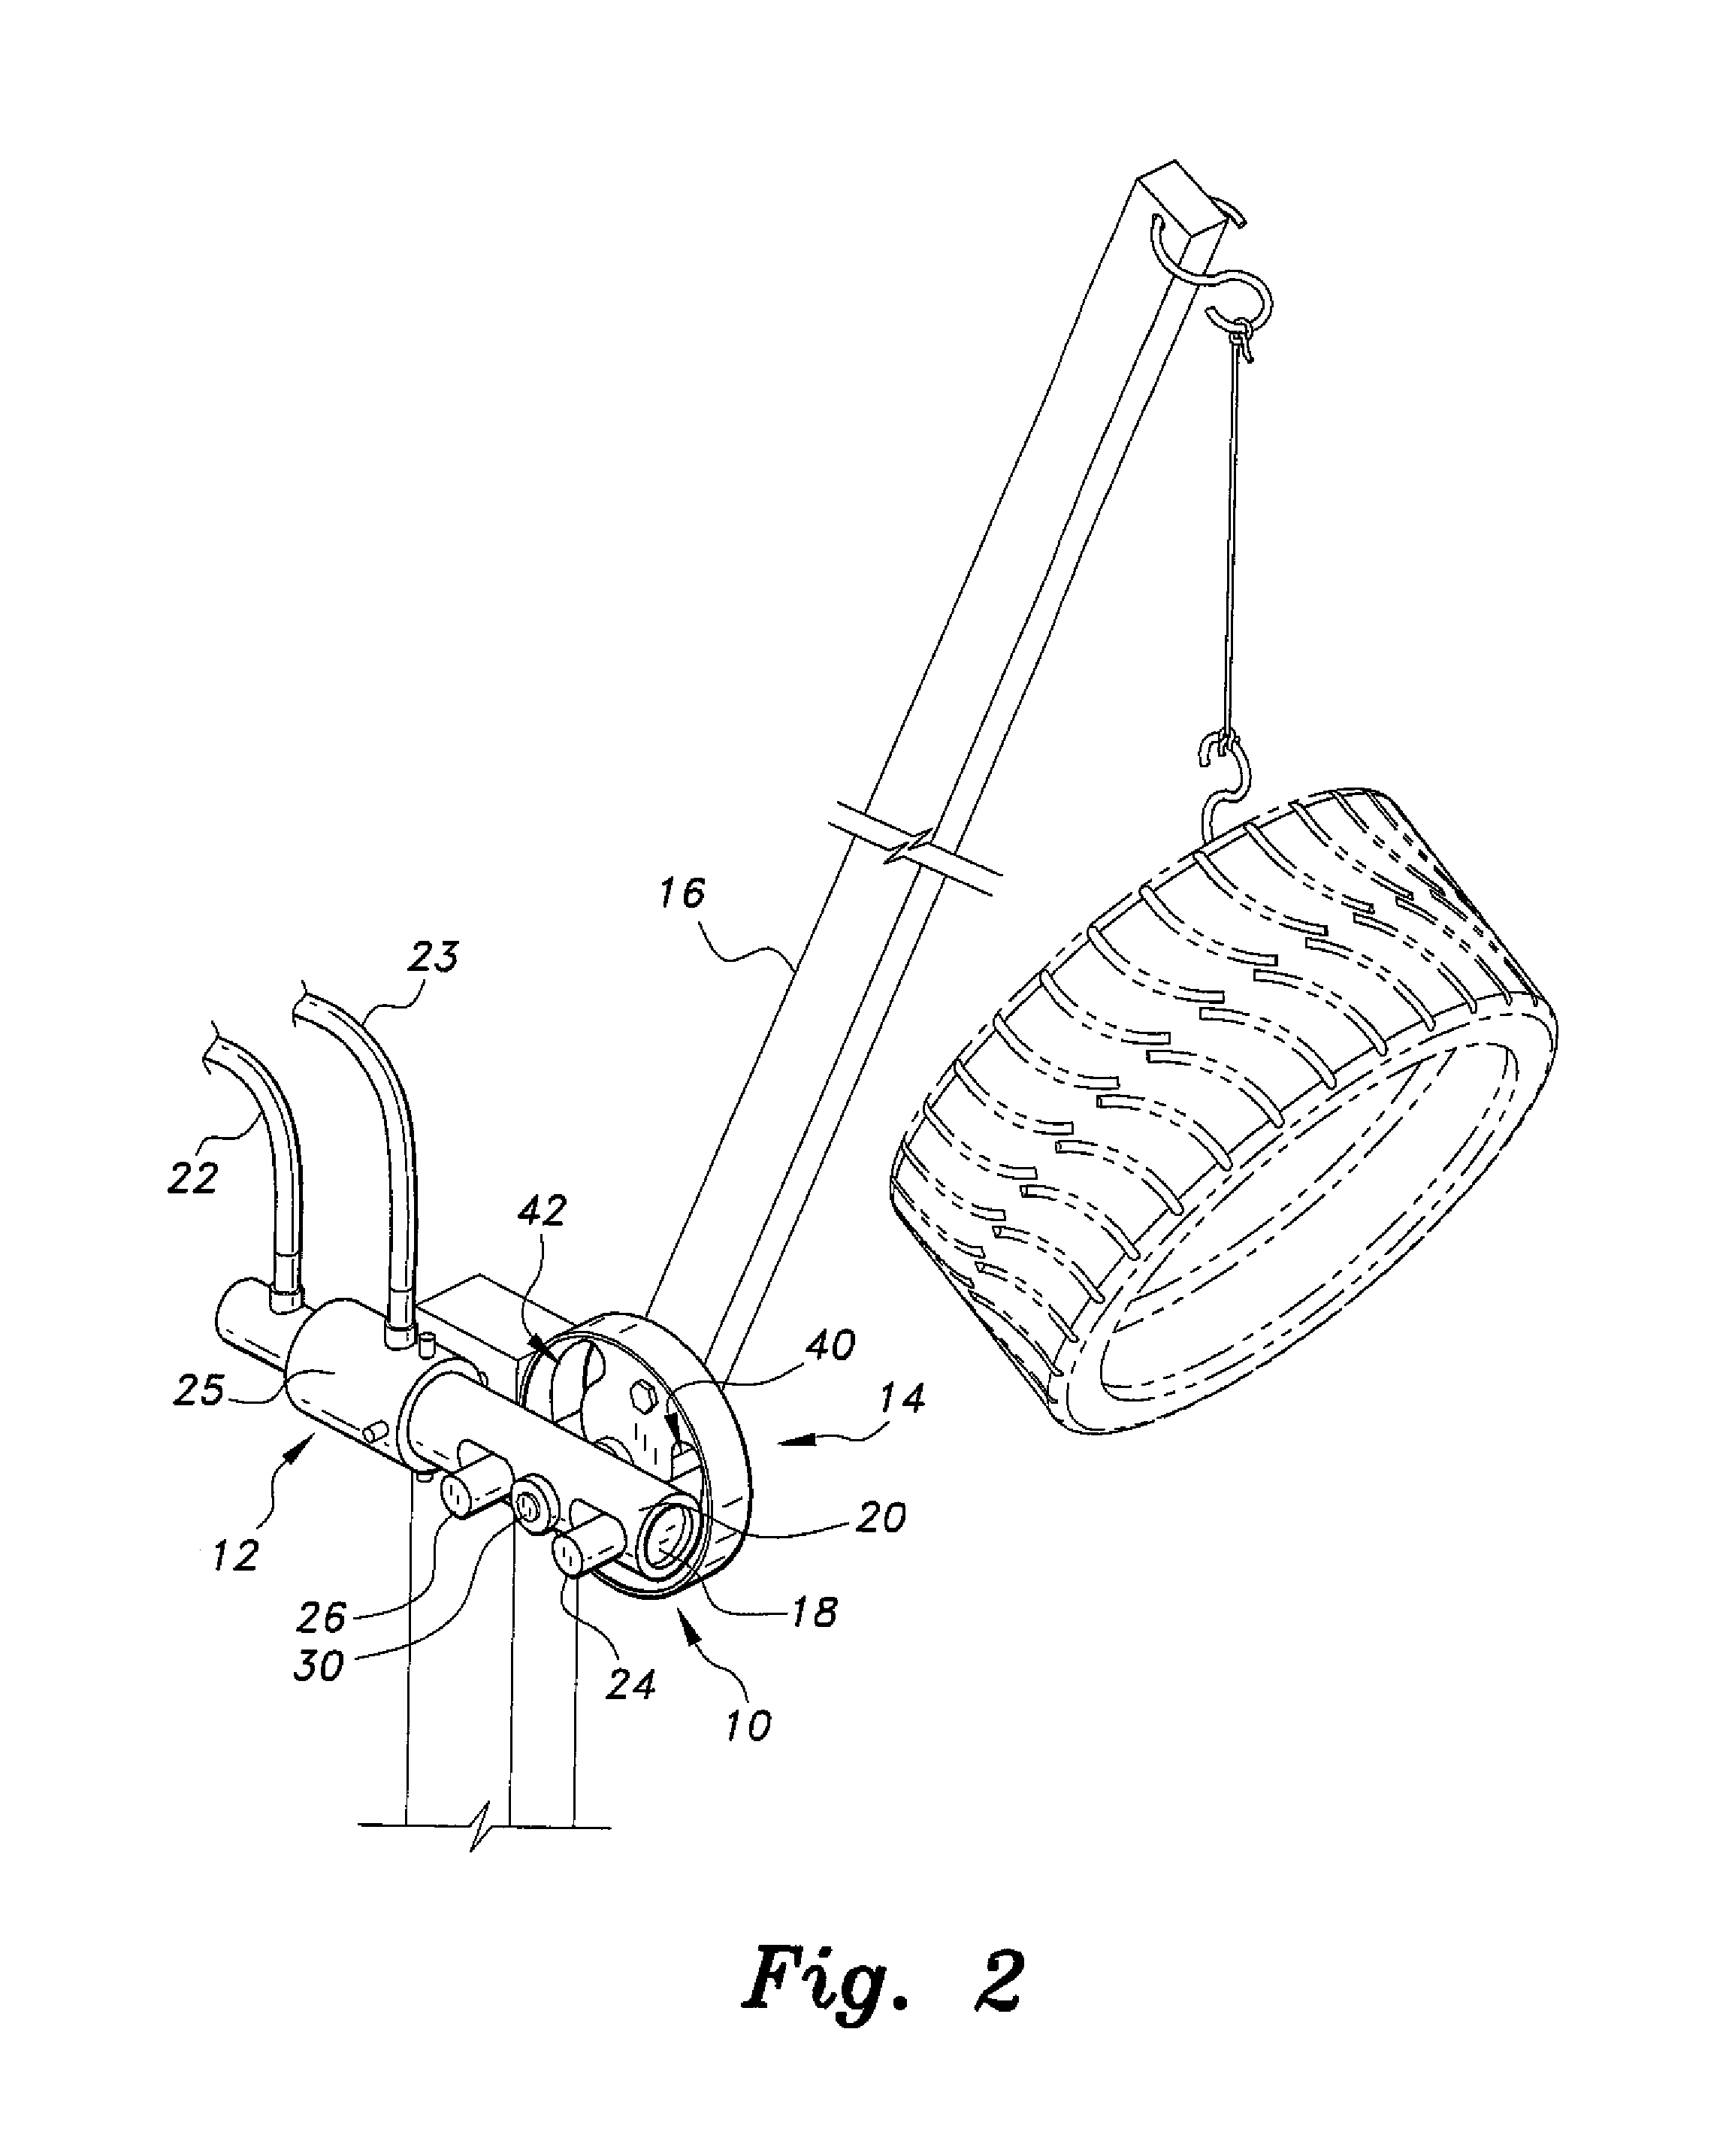 Linear-to-rotary actuator